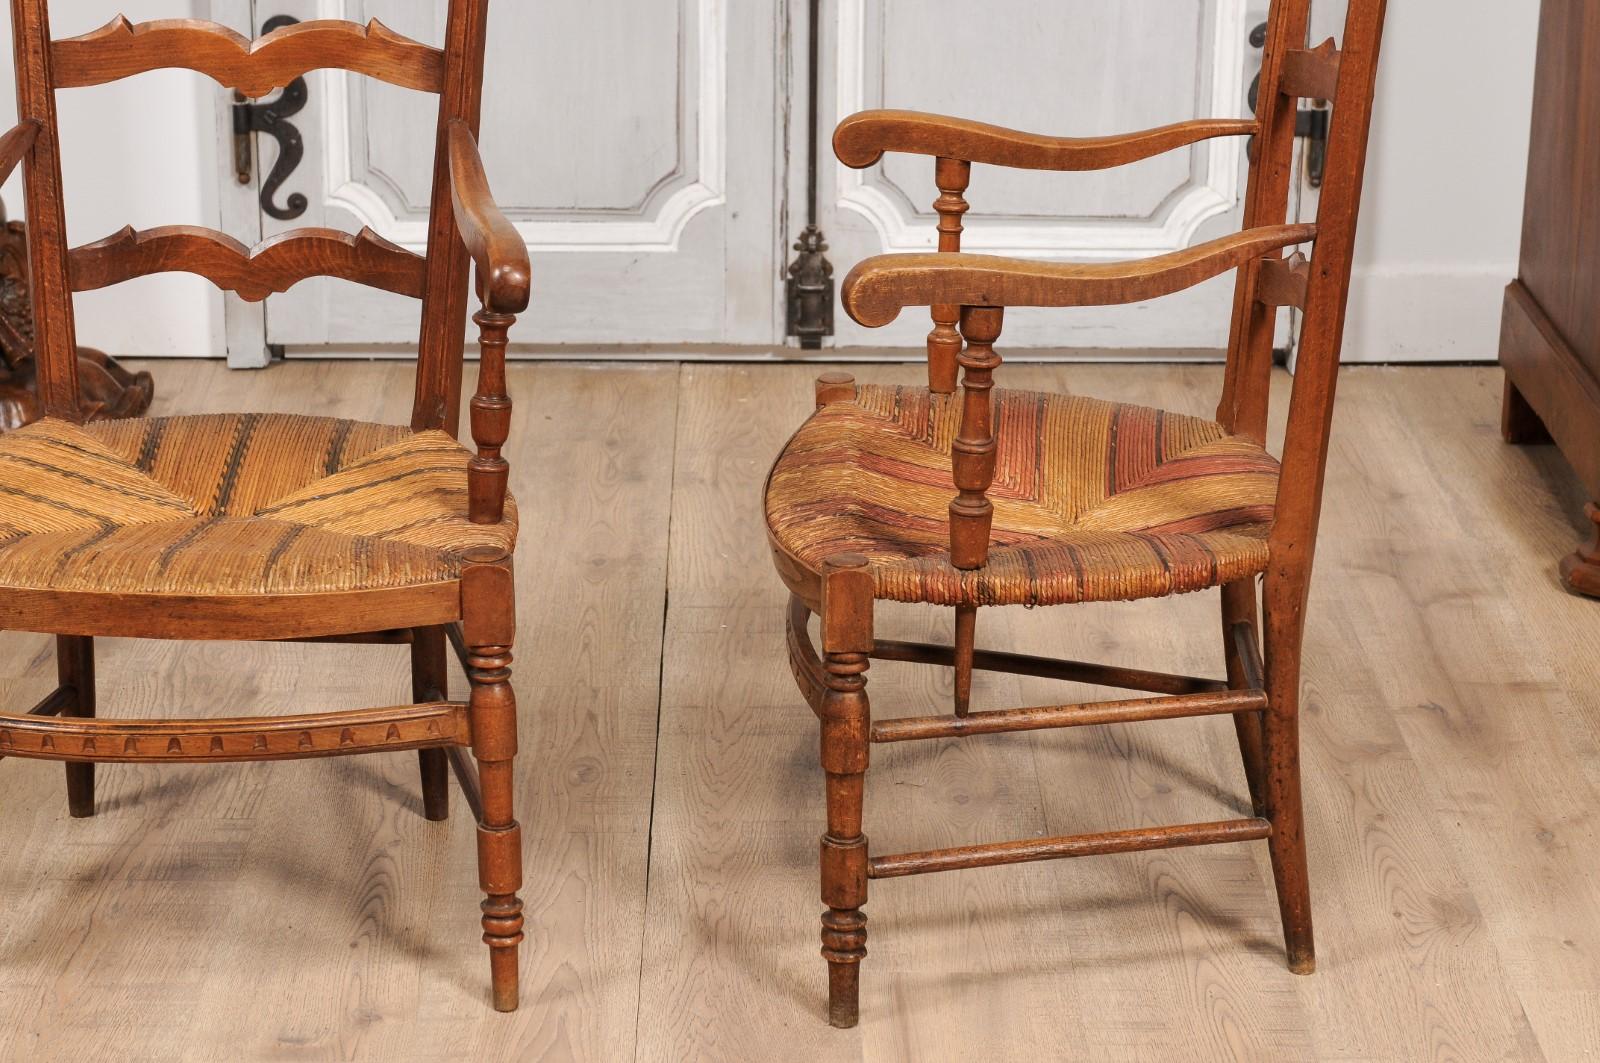 French 1890s Fruitwood Ladder Back Chairs with Straw Seats and Turned Legs For Sale 5